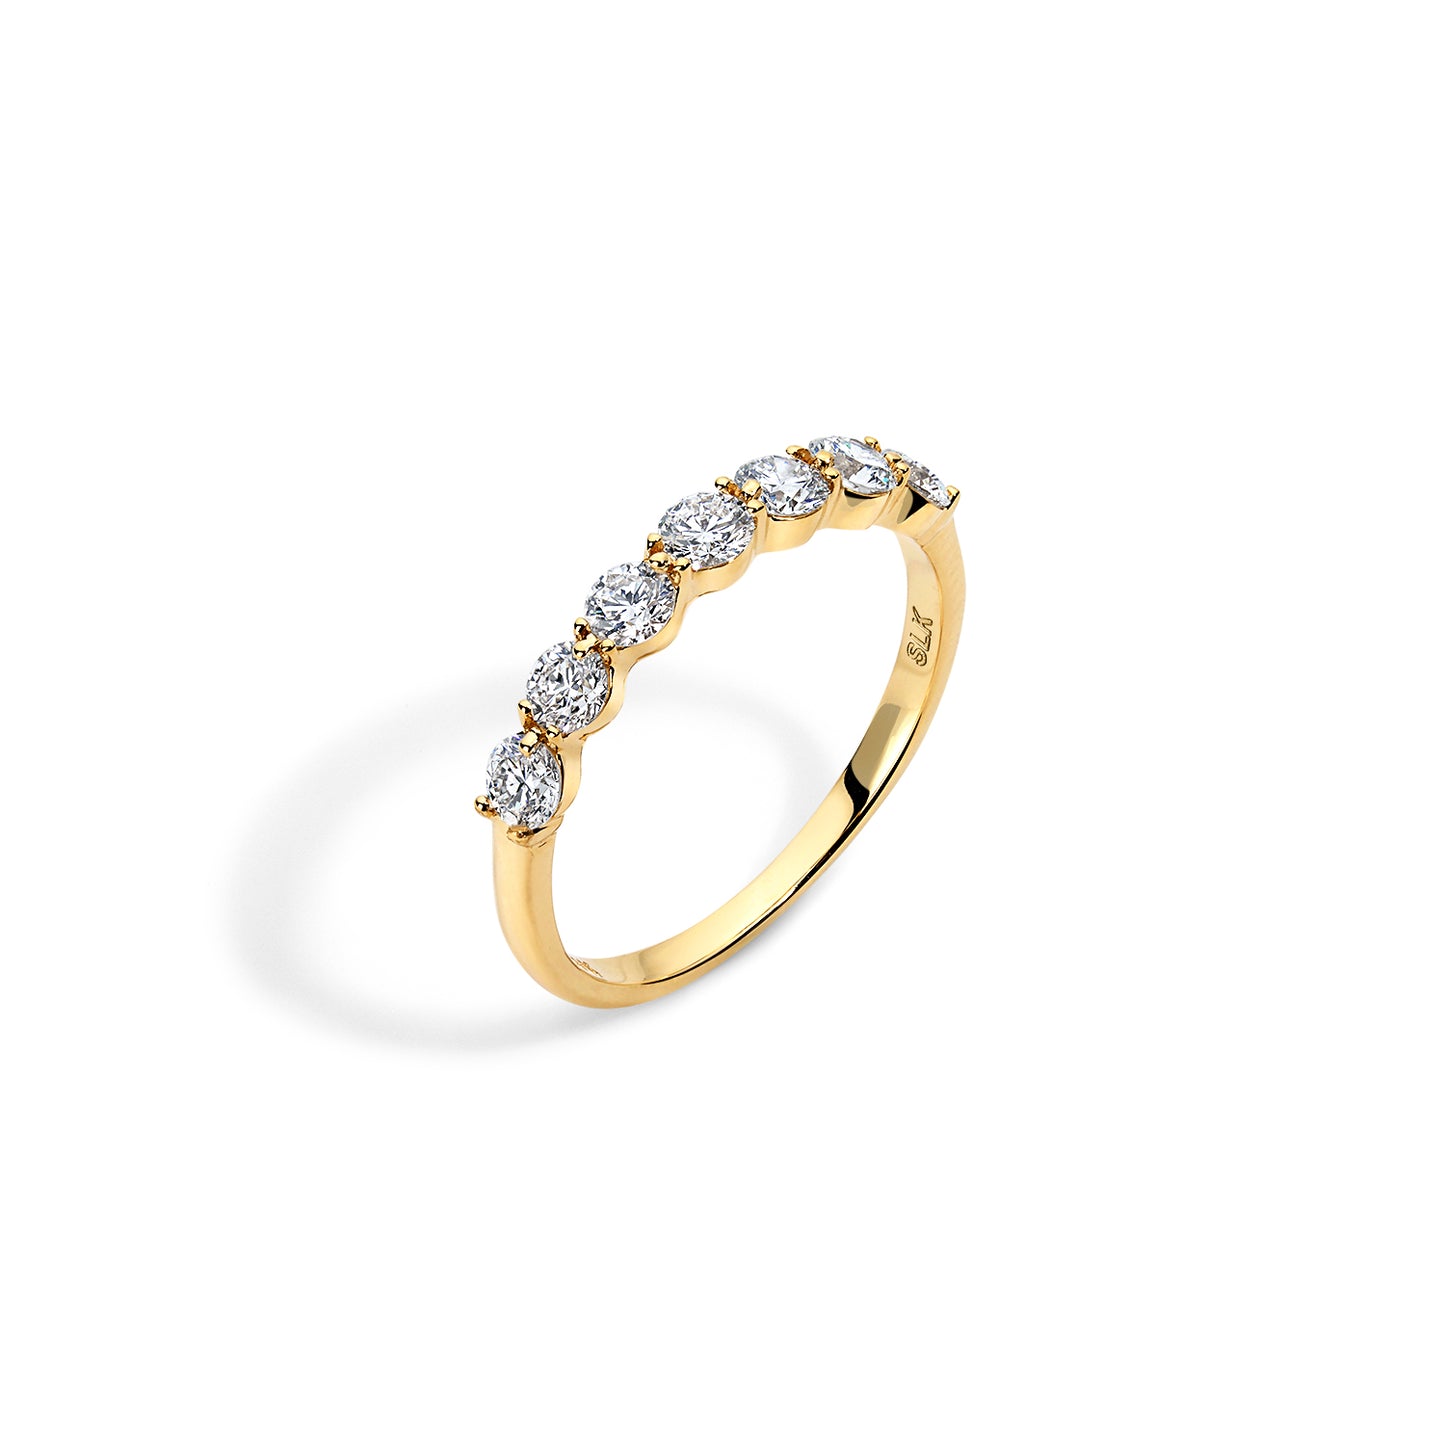 Elegant yellow gold stackable band from the Pretty Ring Collection, designed by Jillian Abboud. Customizable in various metals and stone combinations, crafted in New York